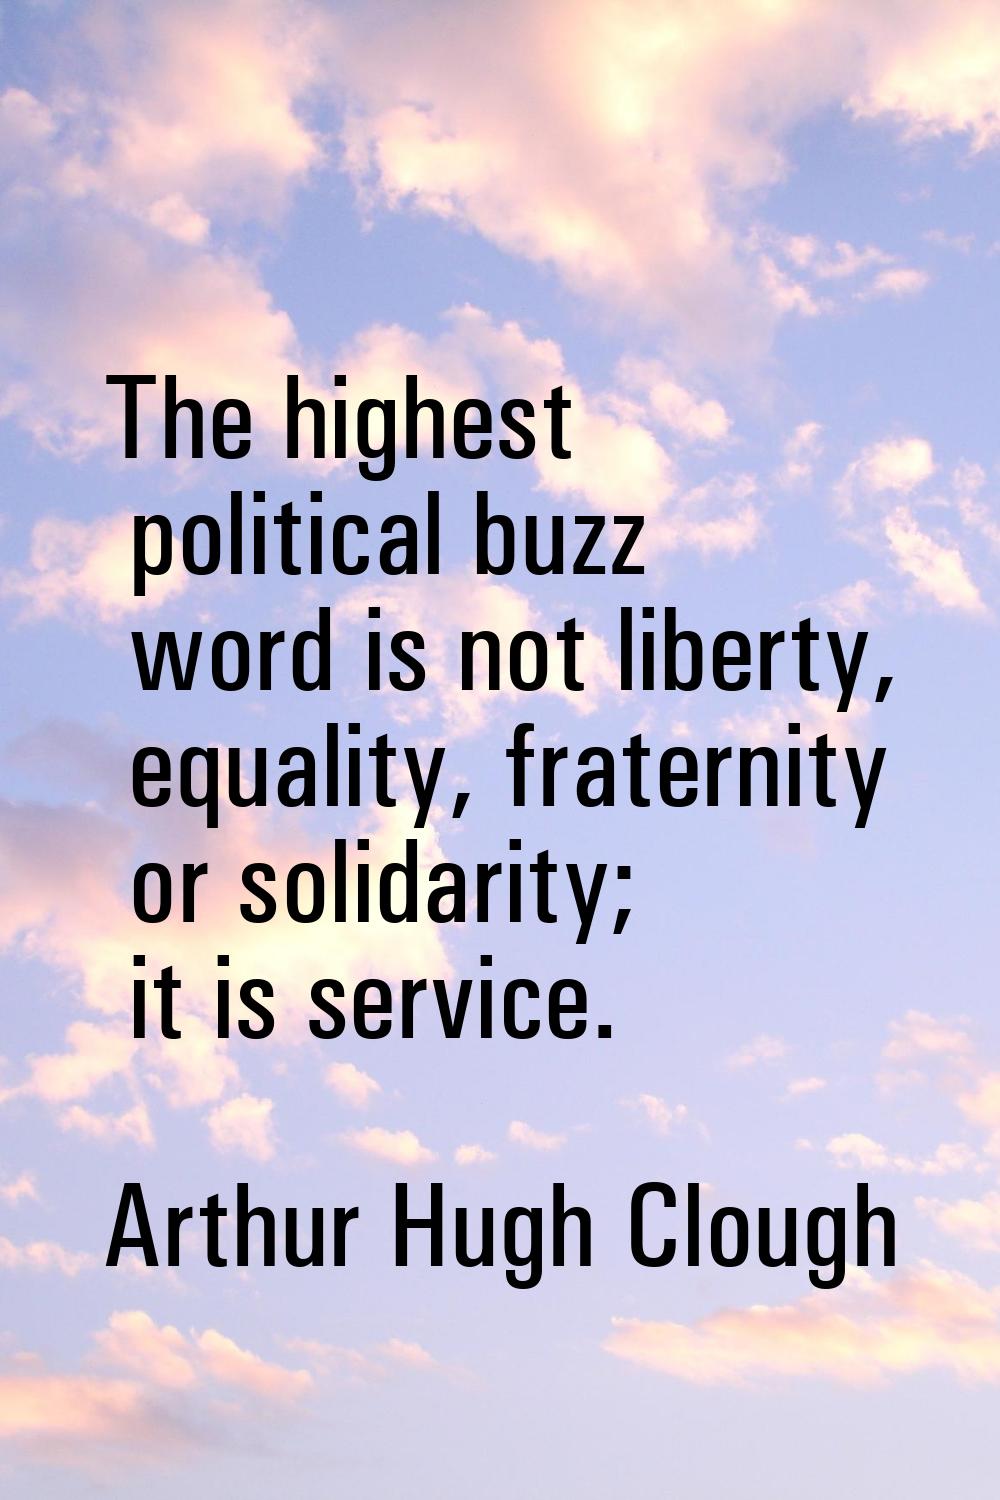 The highest political buzz word is not liberty, equality, fraternity or solidarity; it is service.